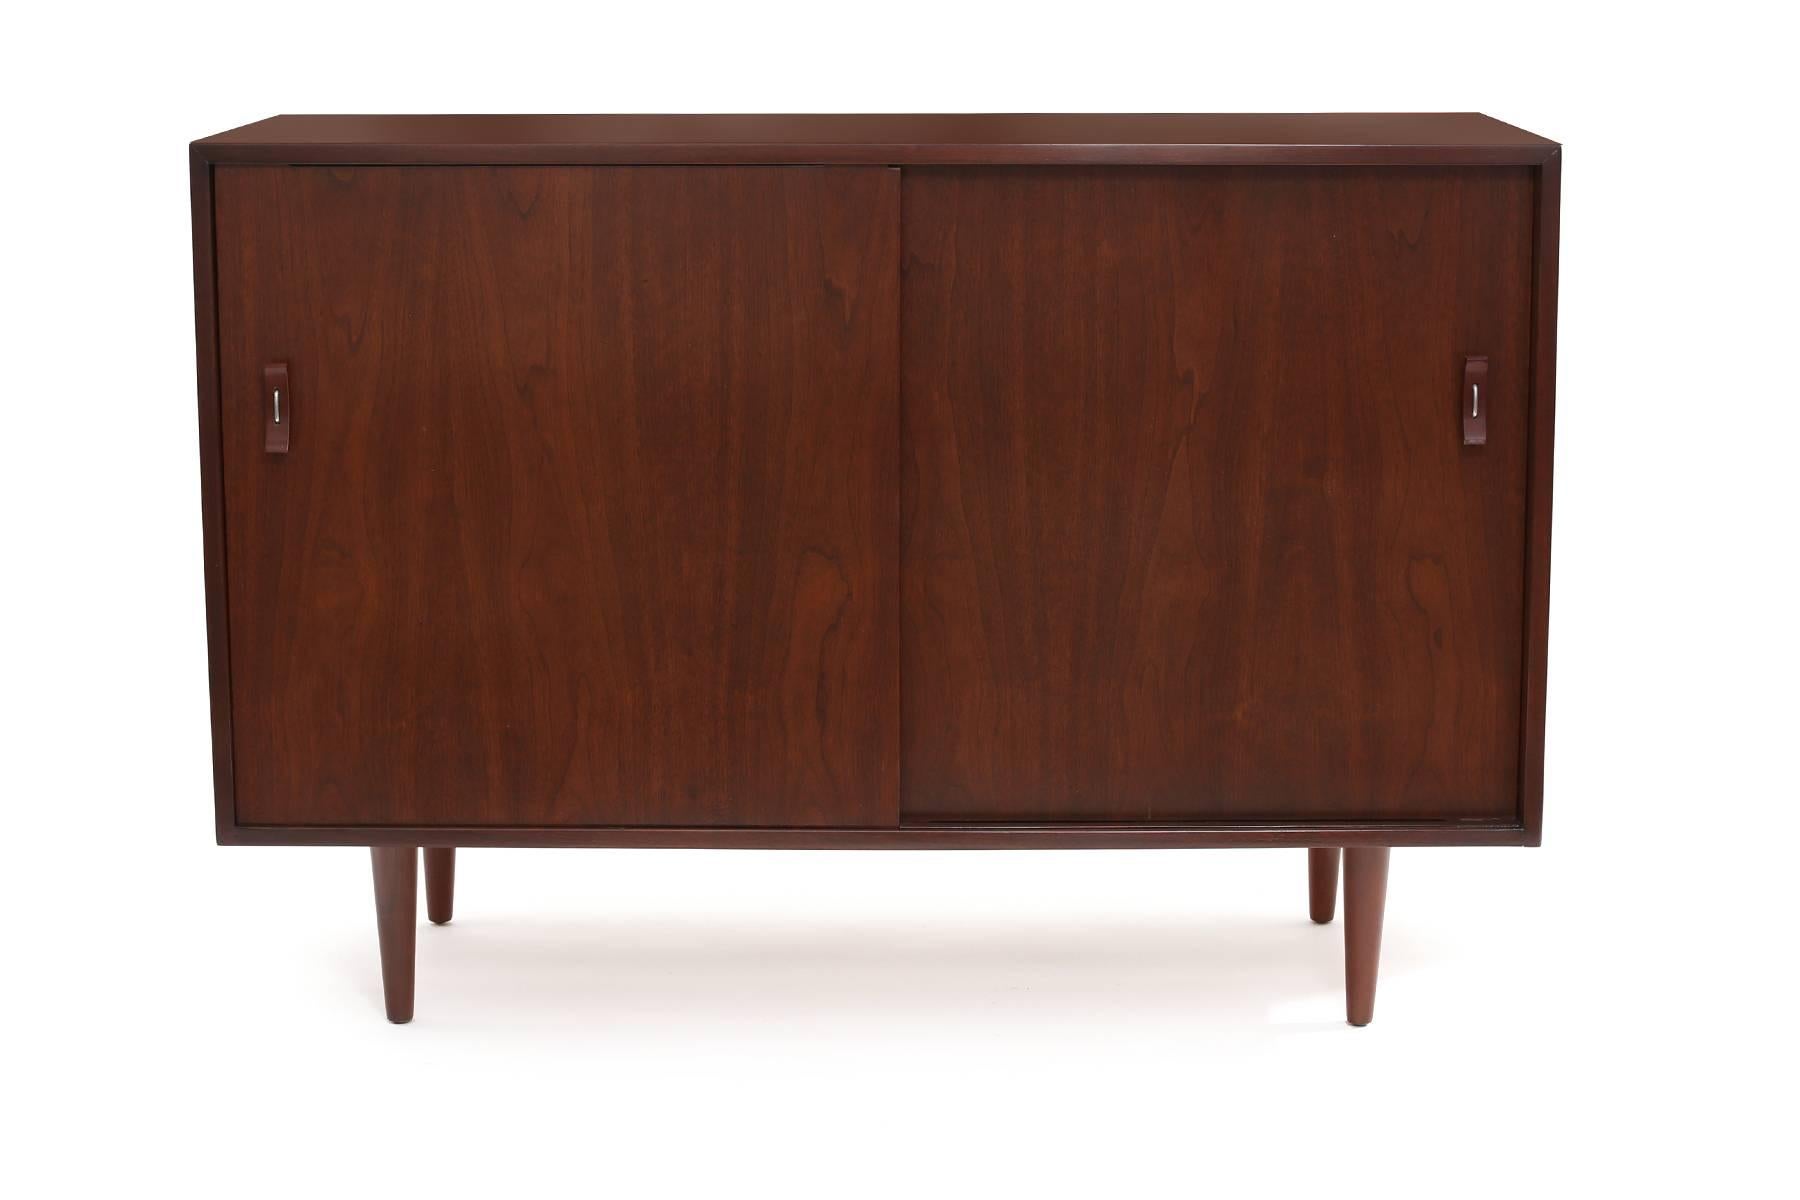 Stanley Young for Glenn of California walnut chest, circa late 1950s. This lovely example has been recently impeccably refinished. It has Glenn's iconic bentwood handles and burnt orange lacquered interior drawer fronts.